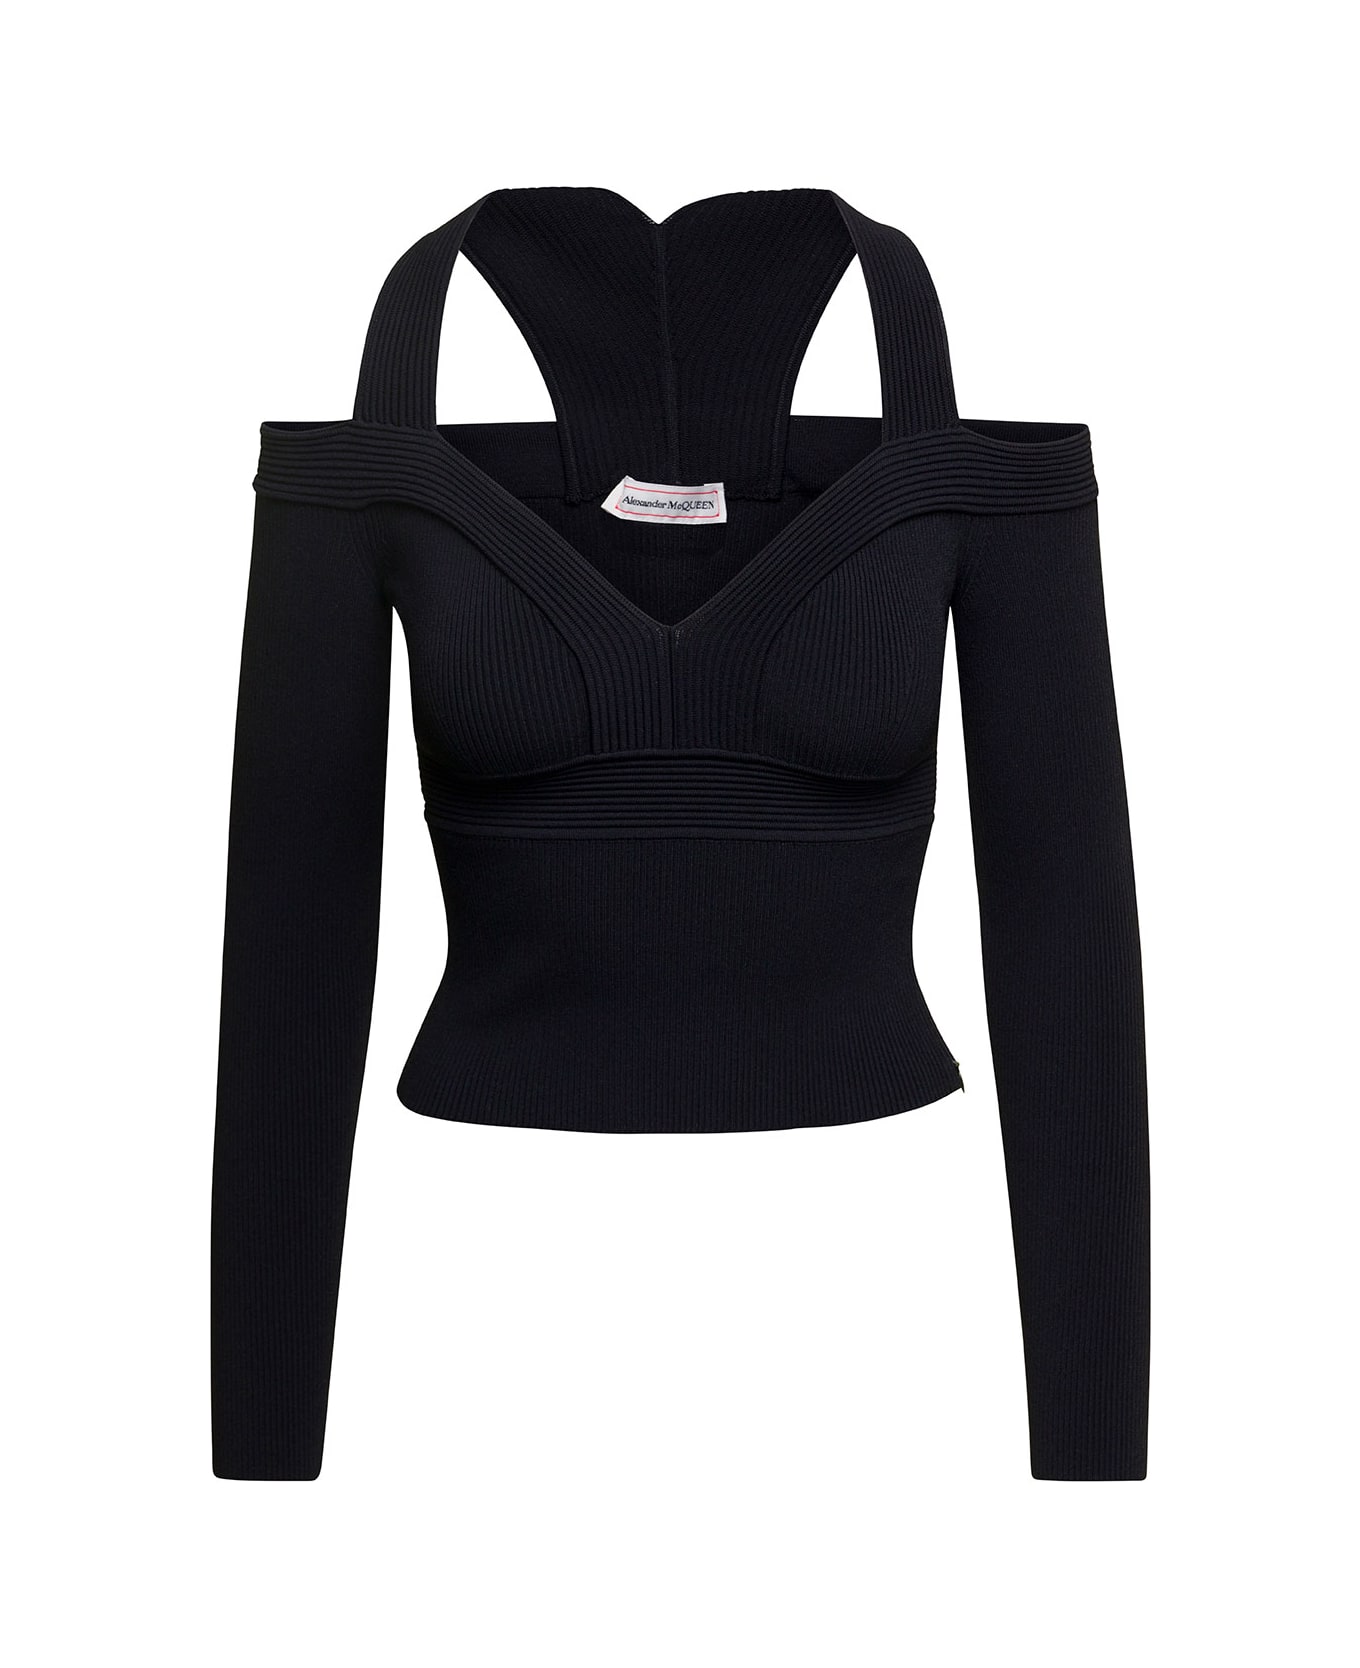 Alexander McQueen Black Cropped Top With Cut-out Details Black In Jersey Stretch Woman - Black